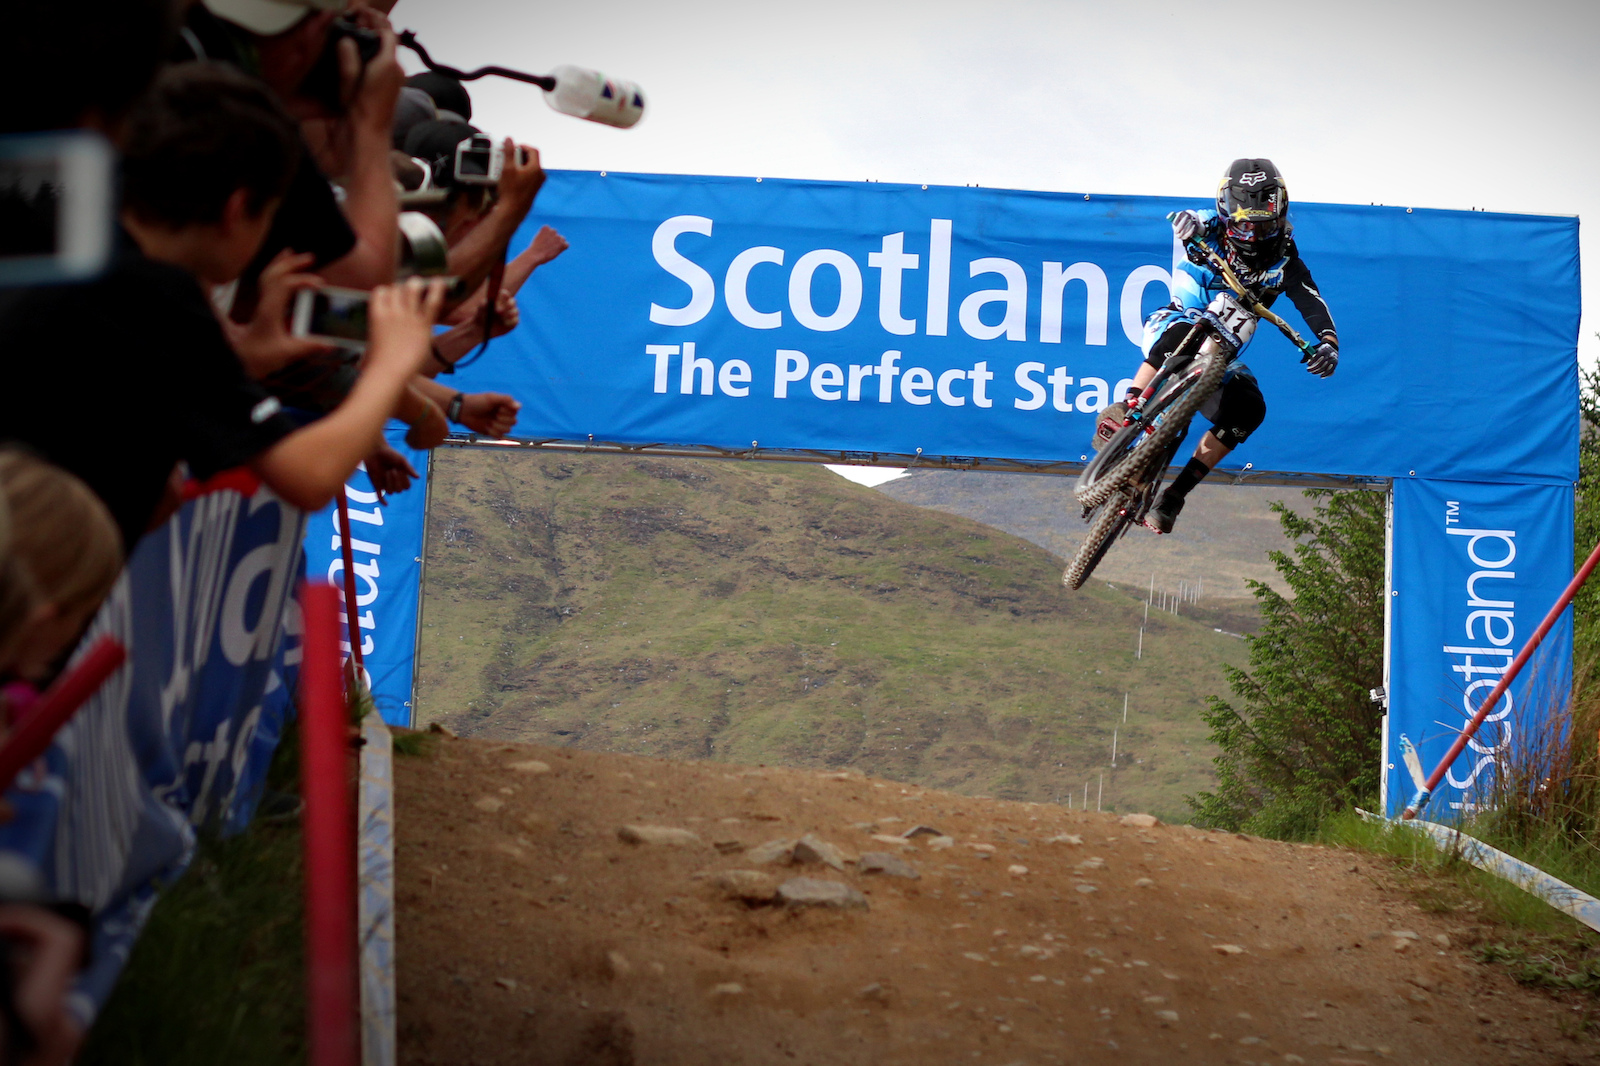 Gutted Hart didn't take the gold, here he is on his run home for 7th place - Fort William UCI World Cup 2013